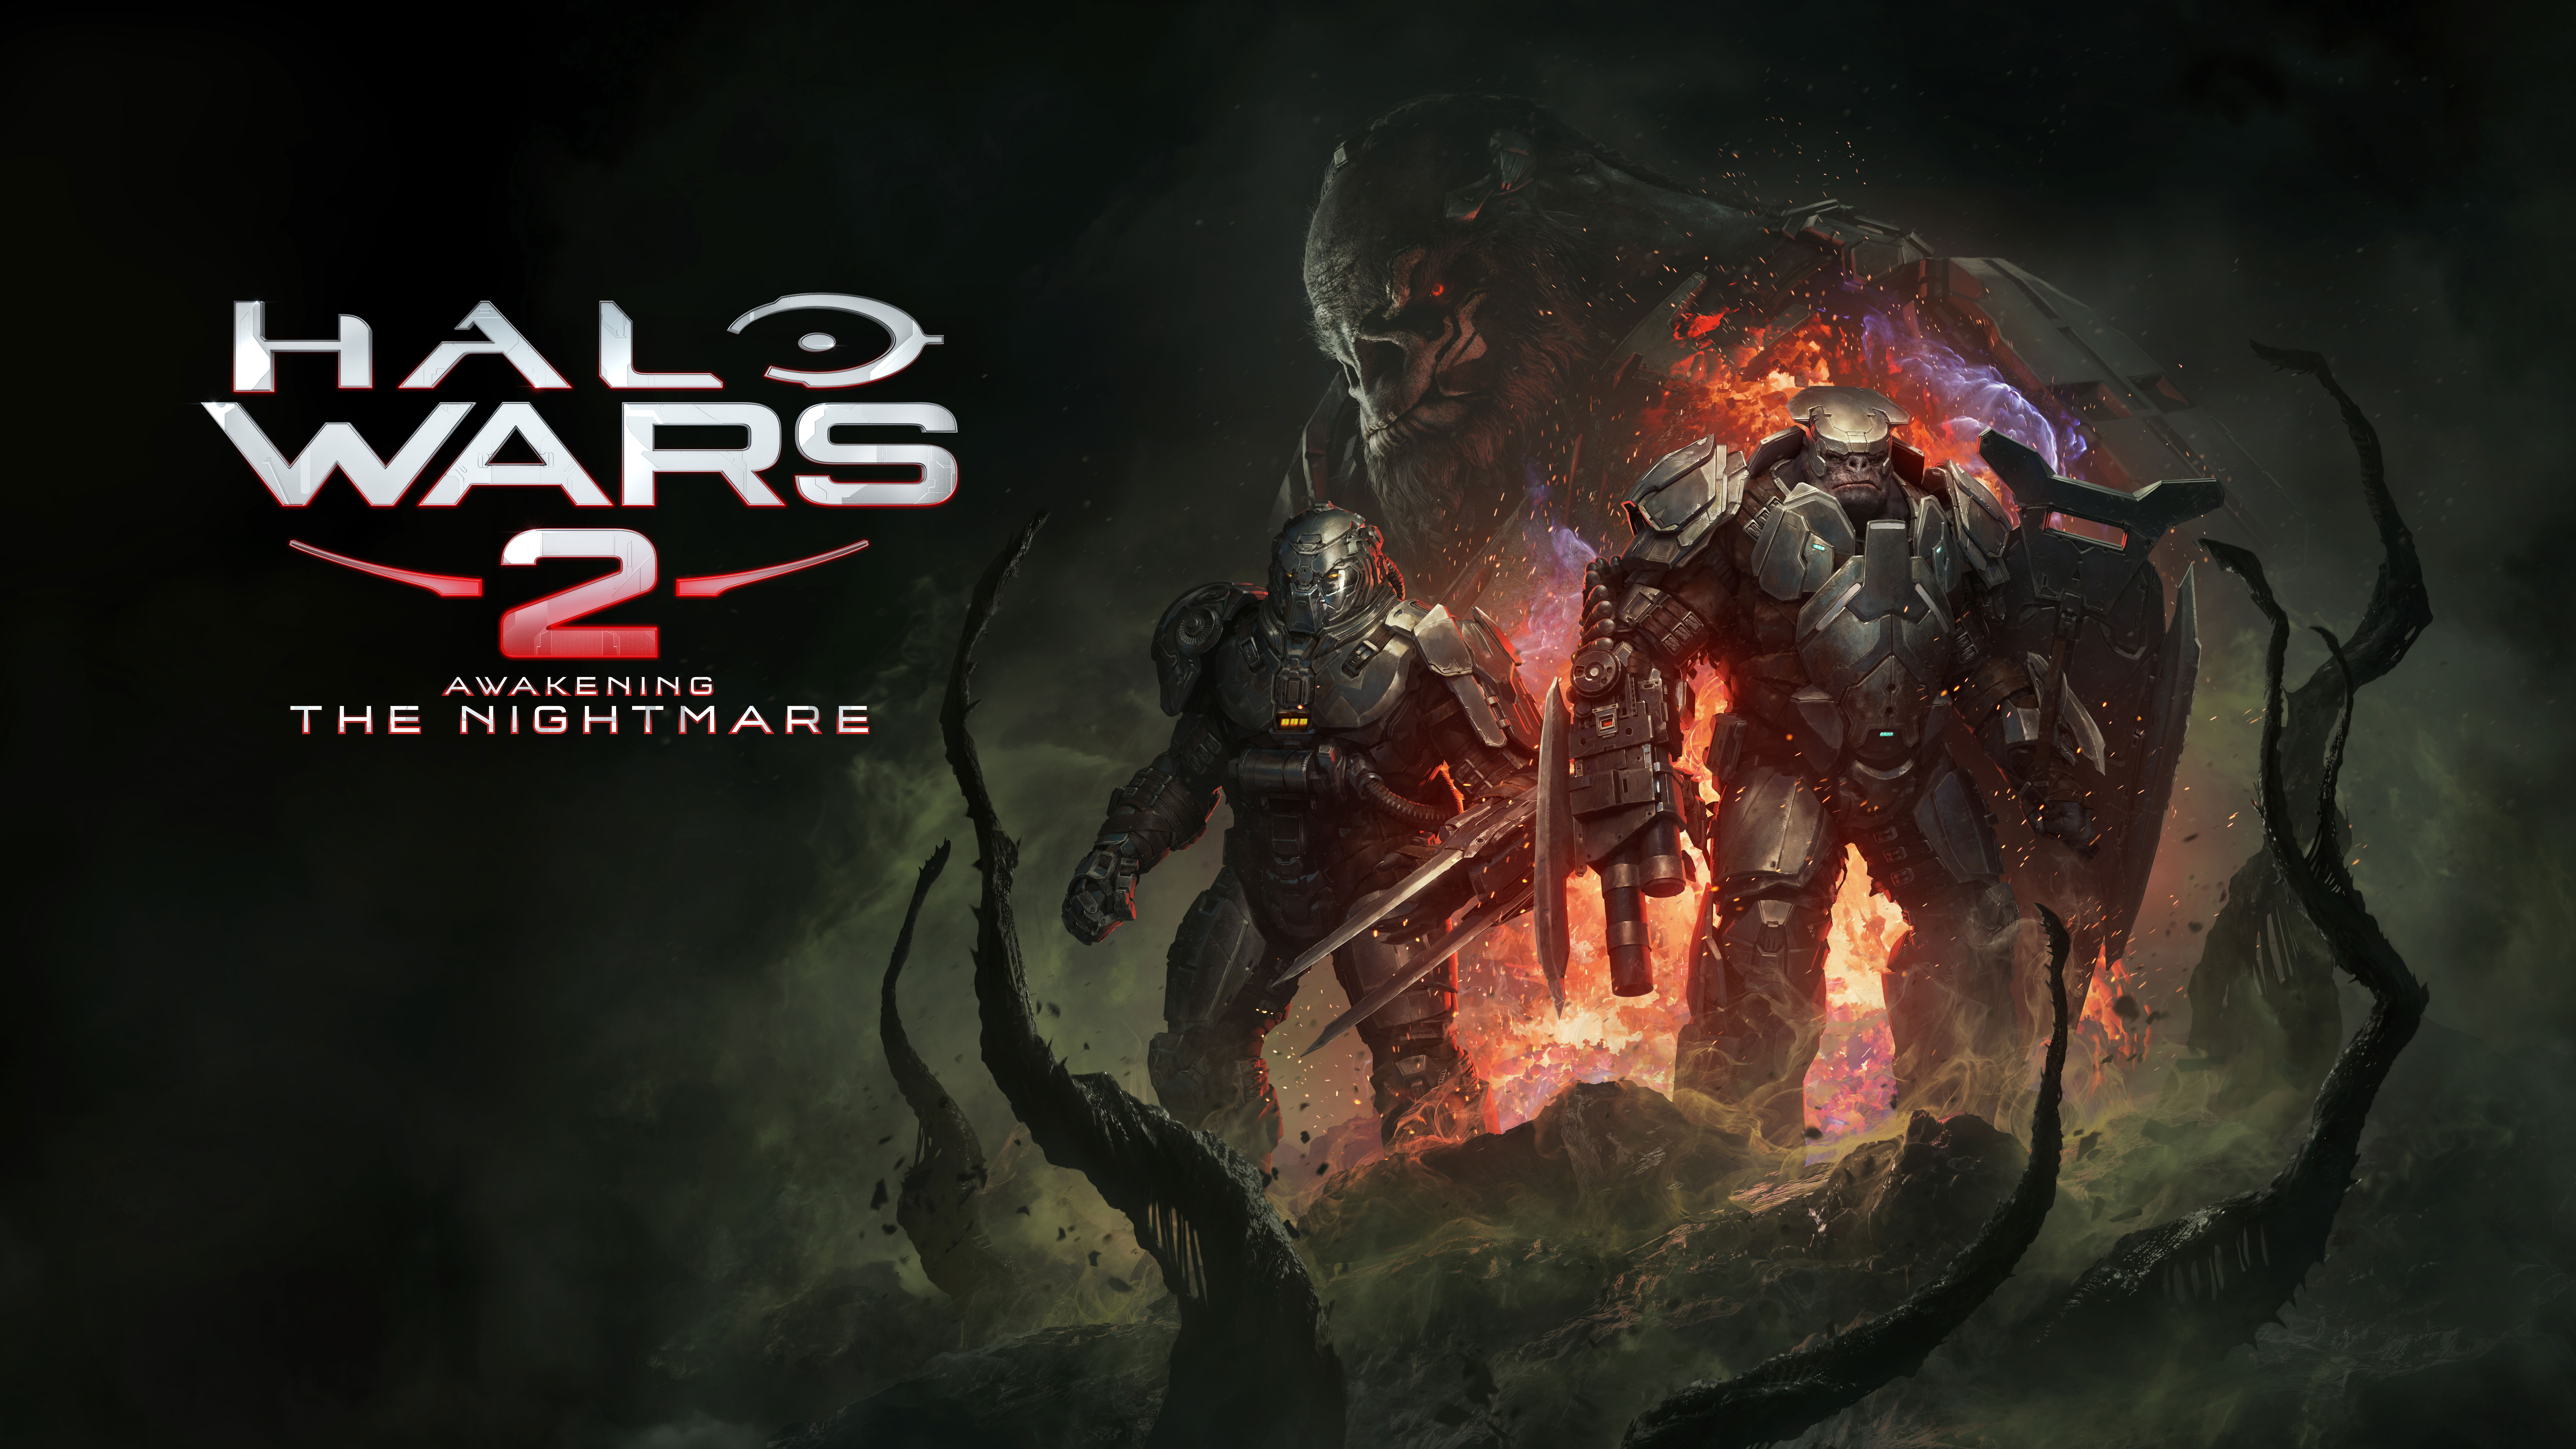 Wallpapers Halo Wars 2 2017 Games Pc Games on the desktop